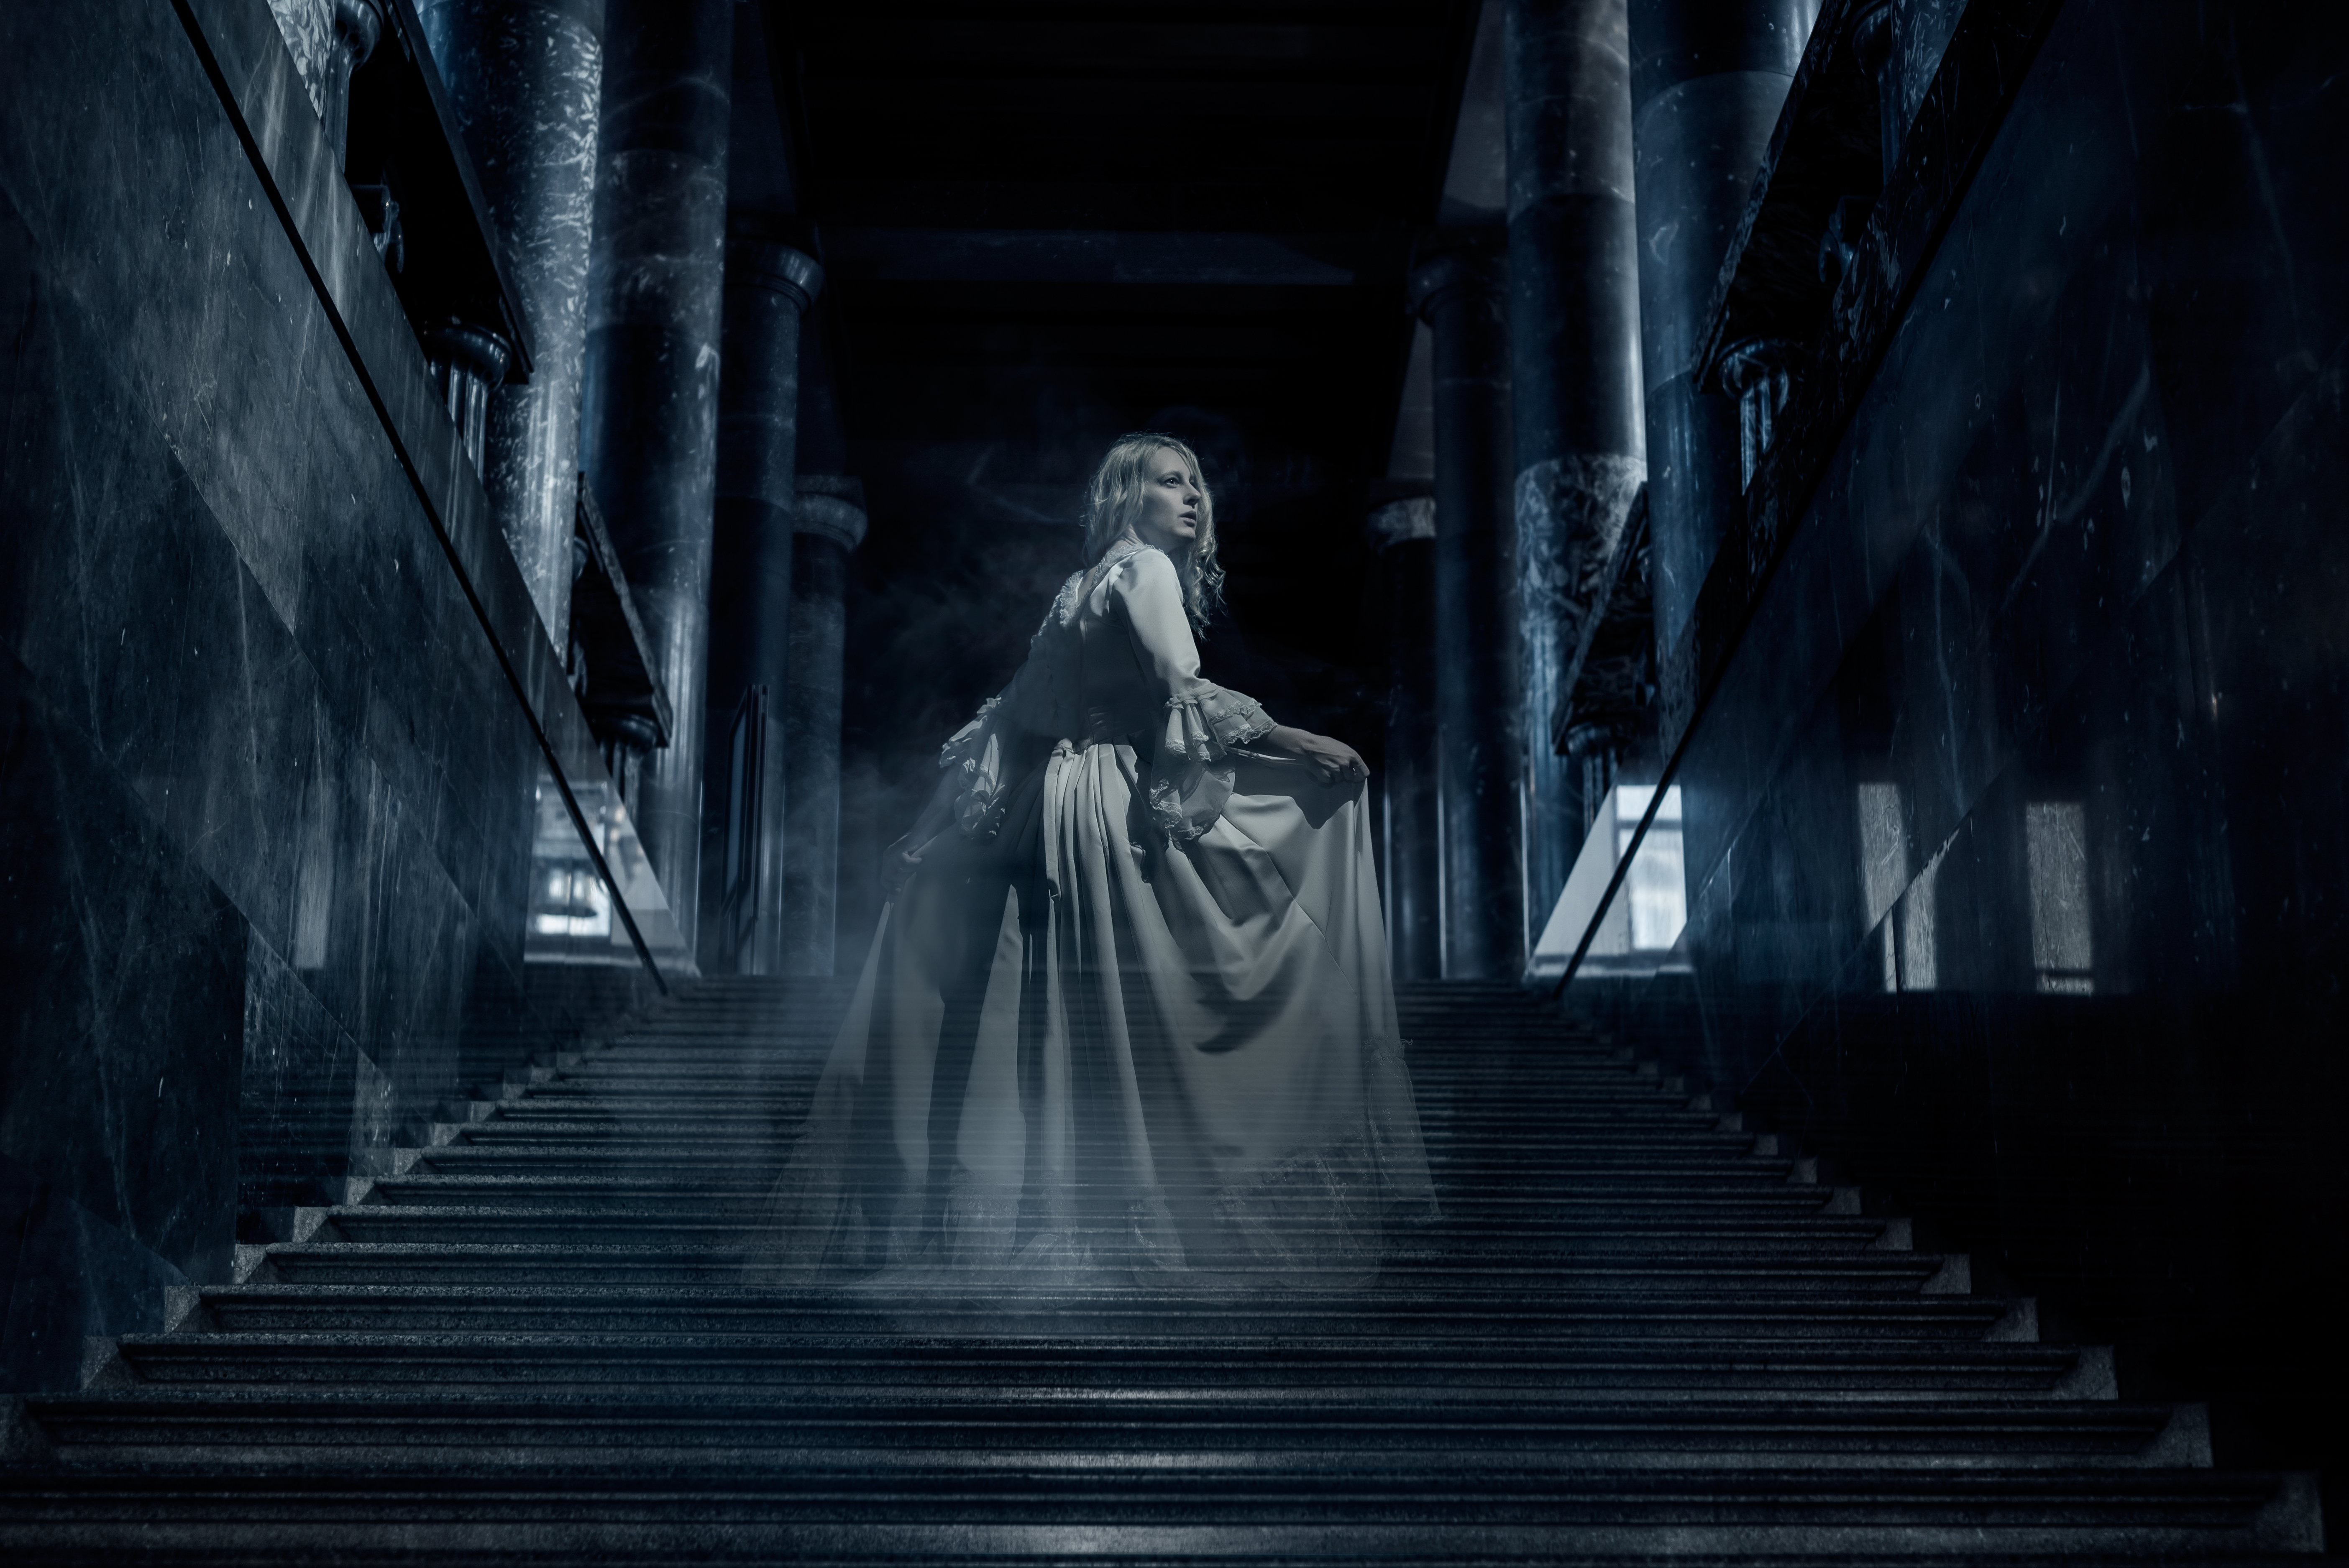 A Ghost on the Stairs